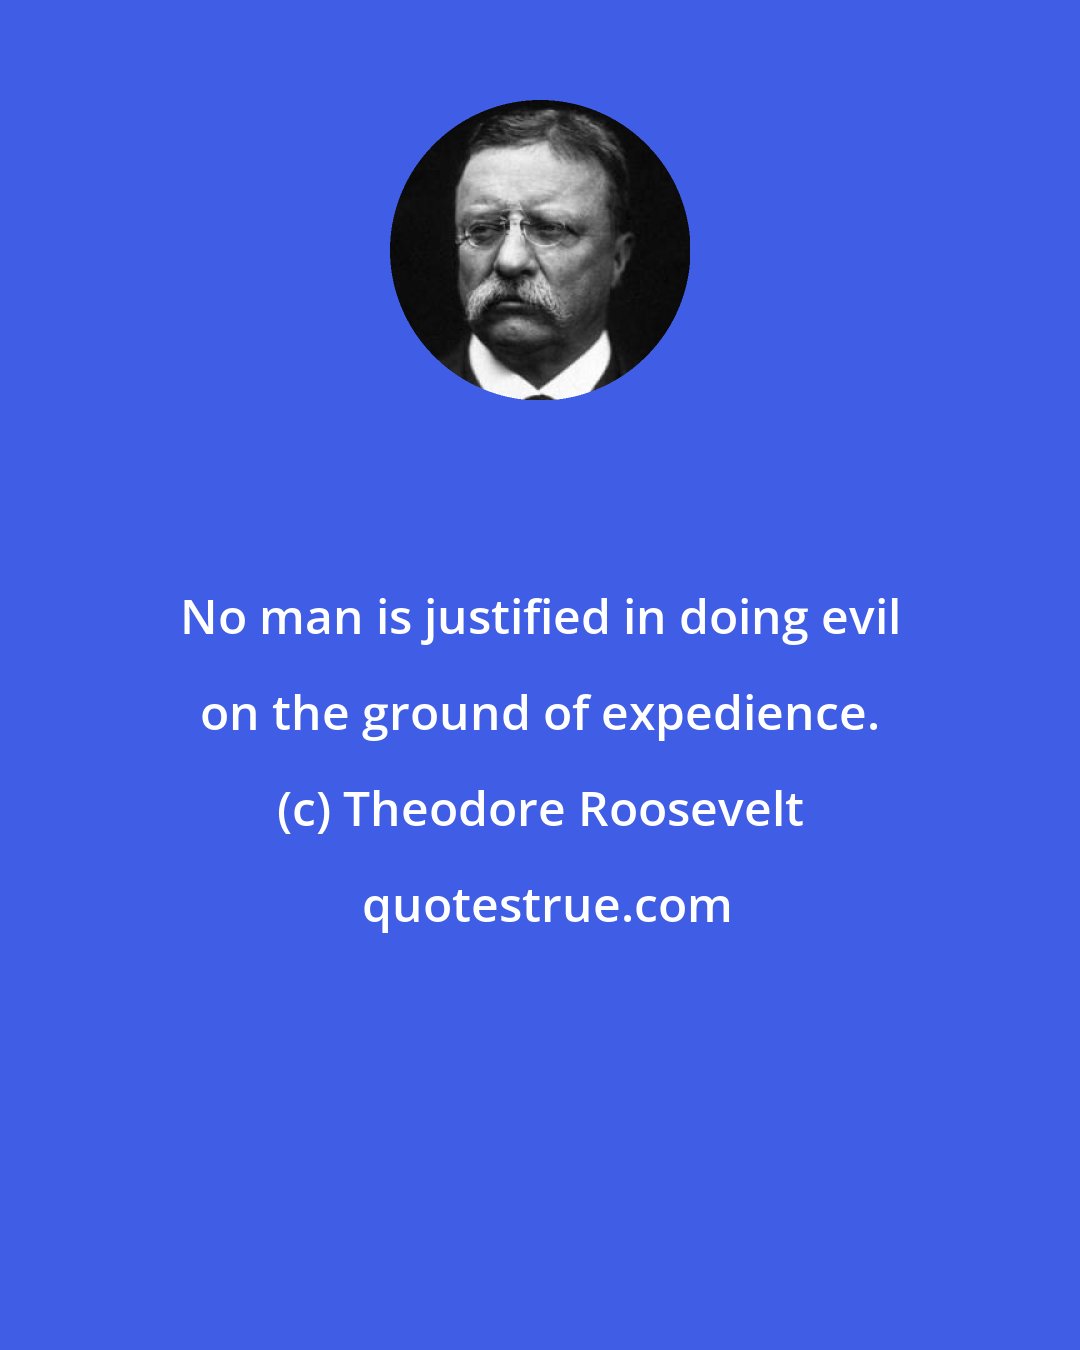 Theodore Roosevelt: No man is justified in doing evil on the ground of expedience.